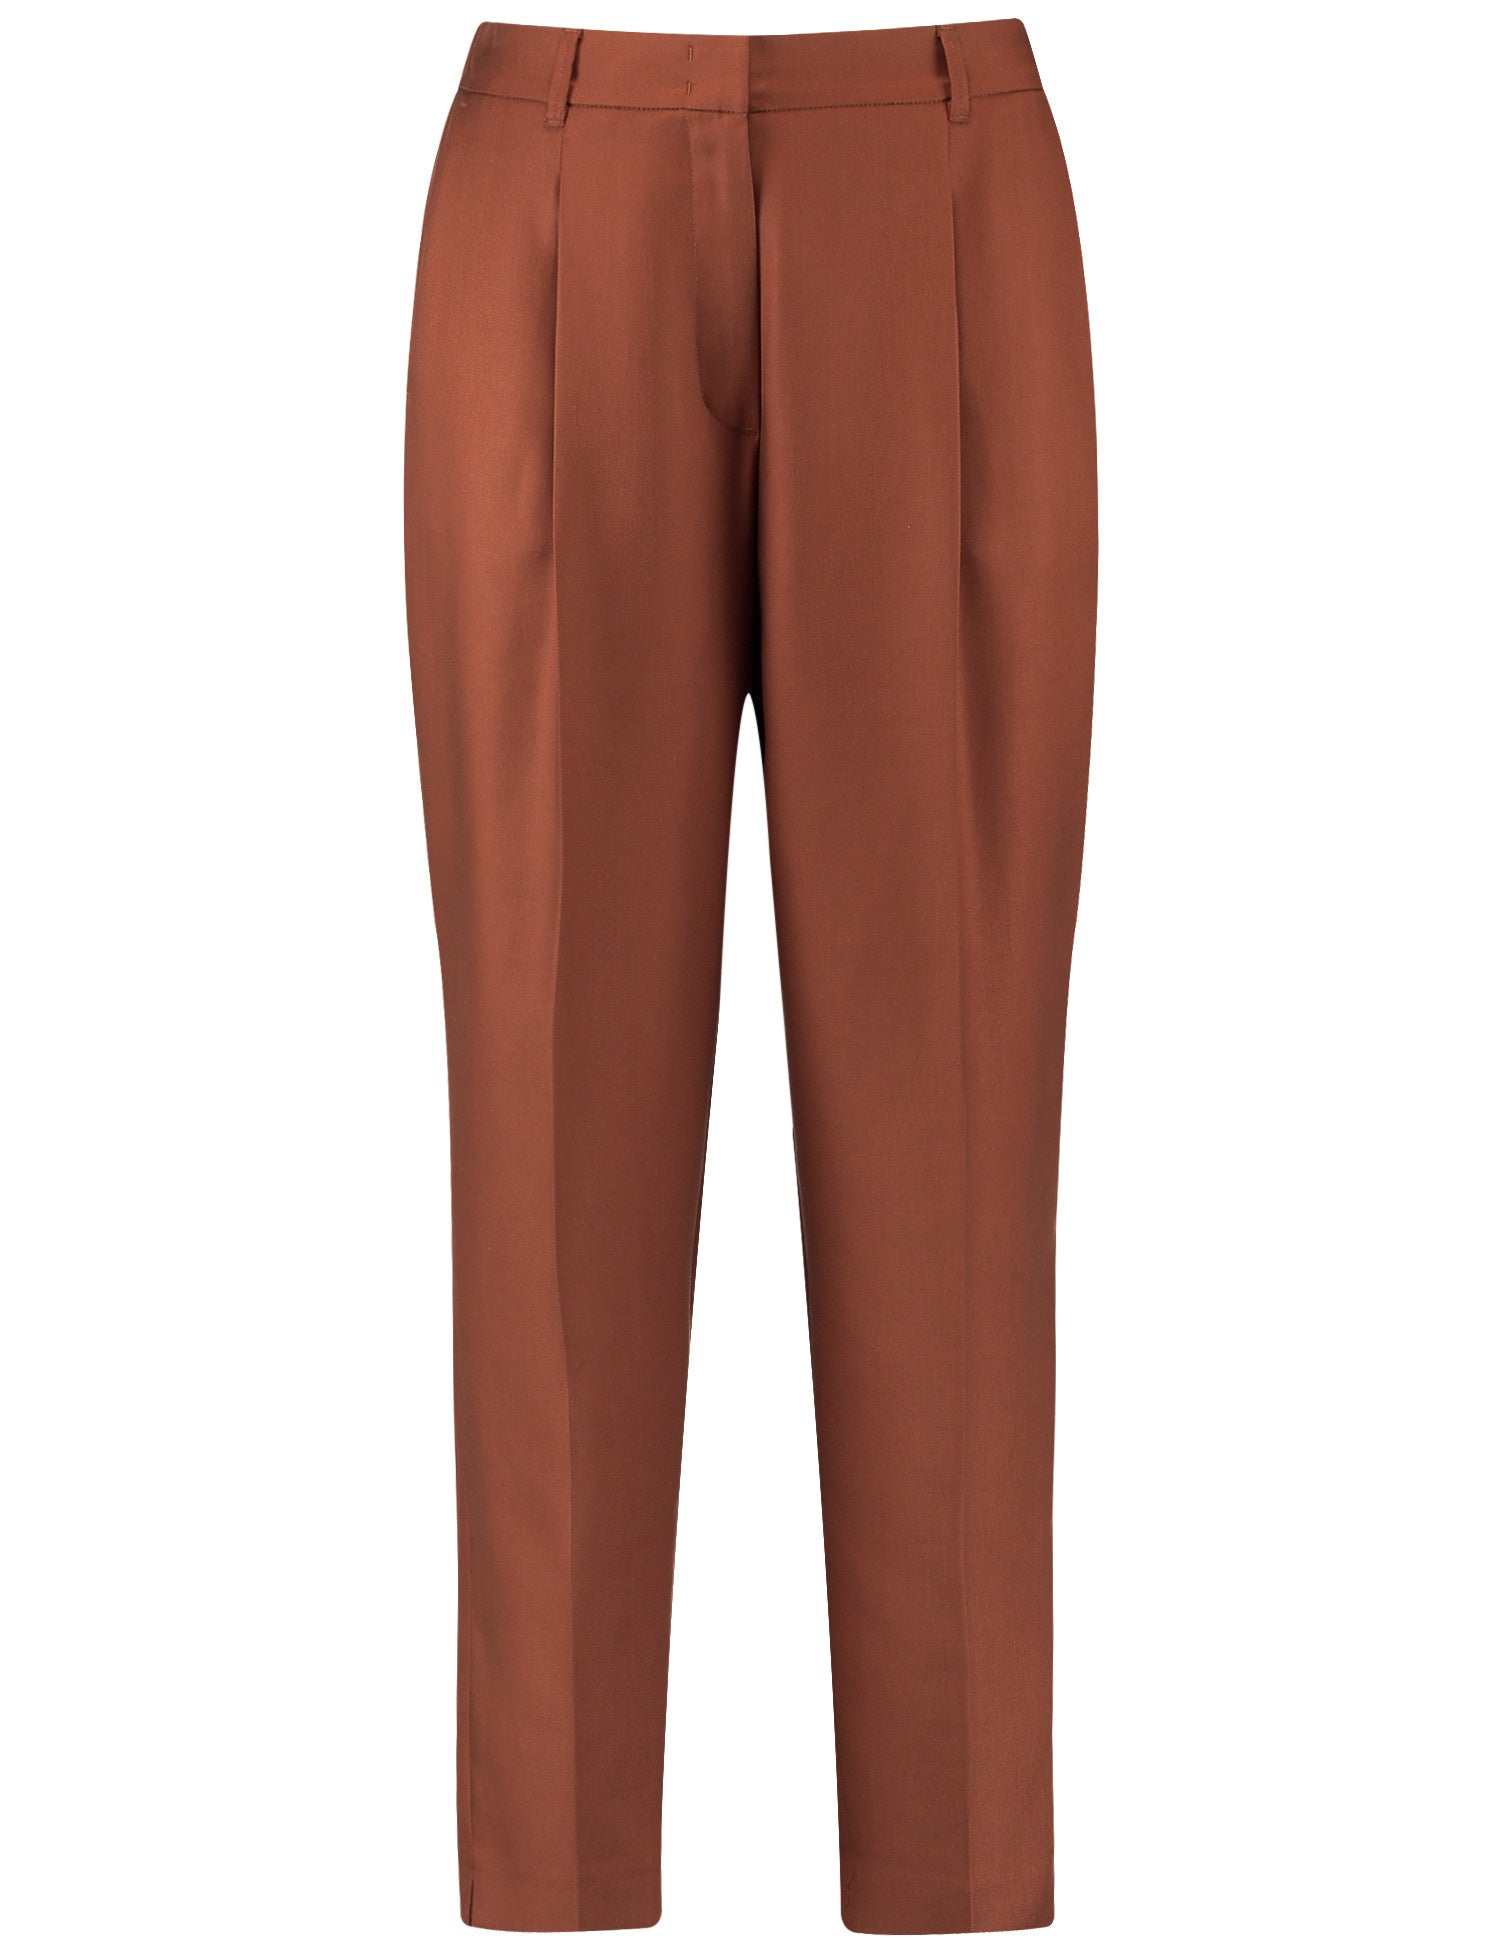 Gerry Weber Tapered Pant